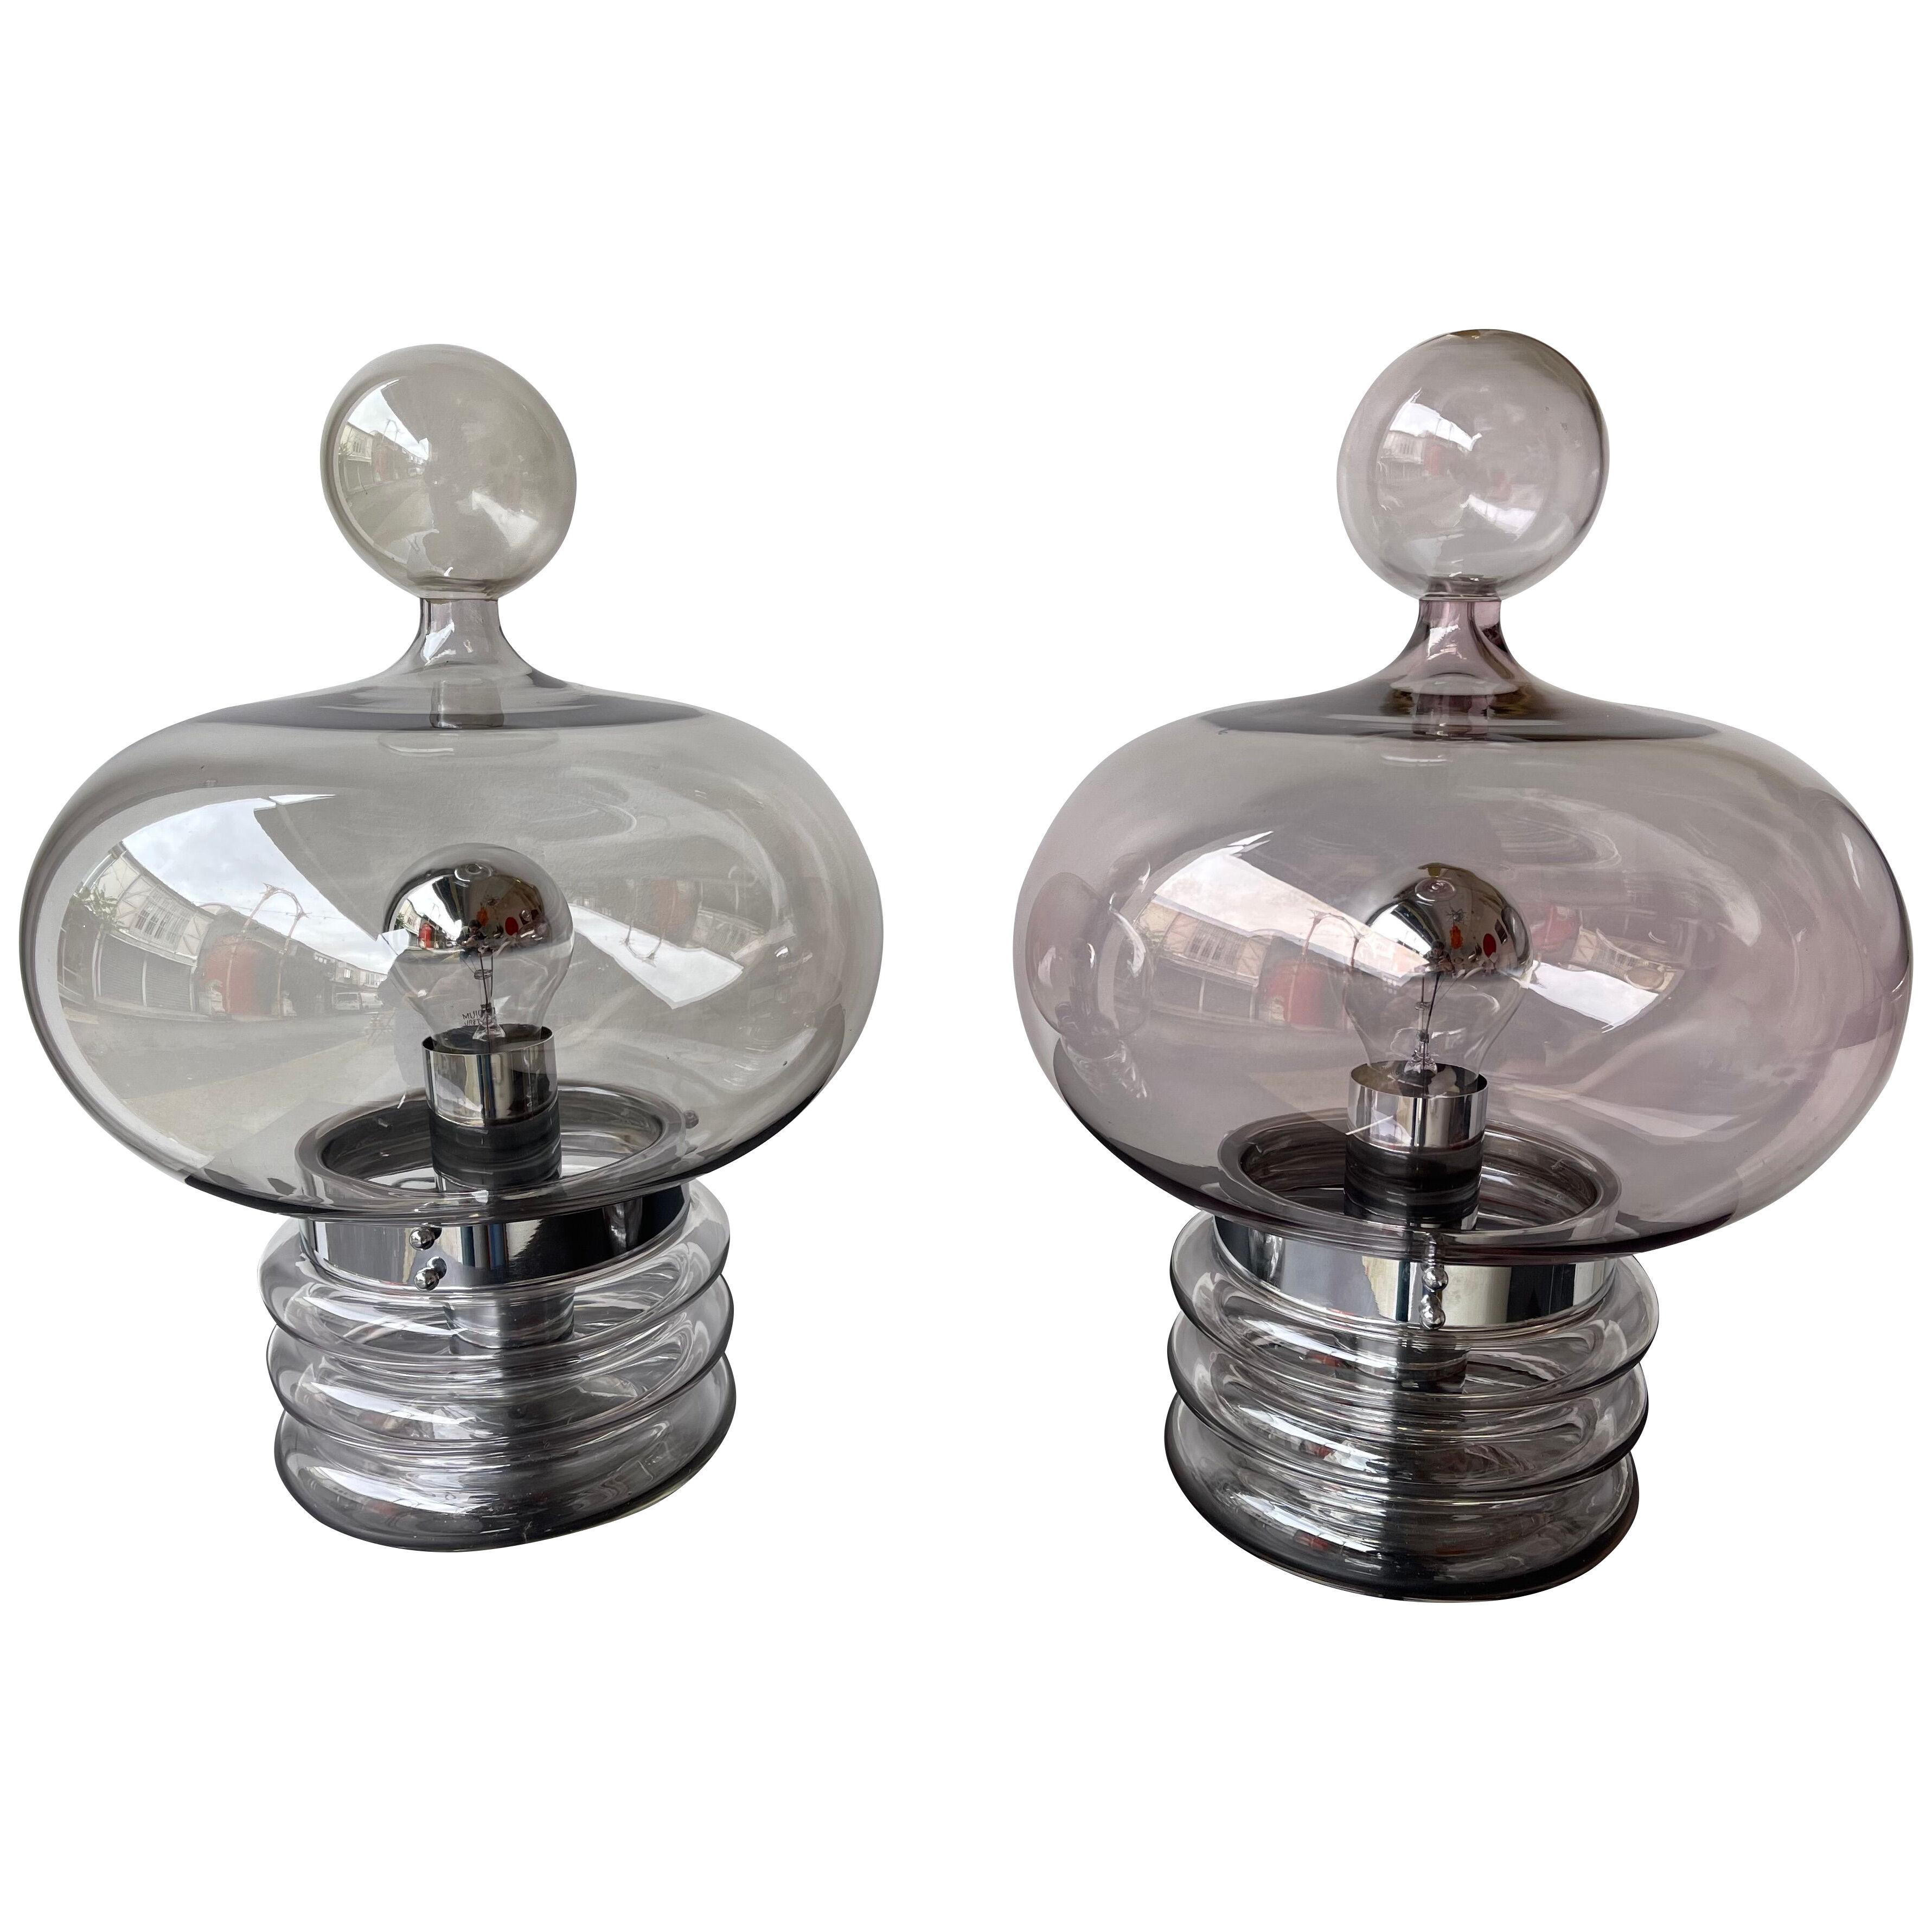 Pair of Gray Smoke Glass and Metal Lamps by Glashütte Limburg. Germany, 1970s